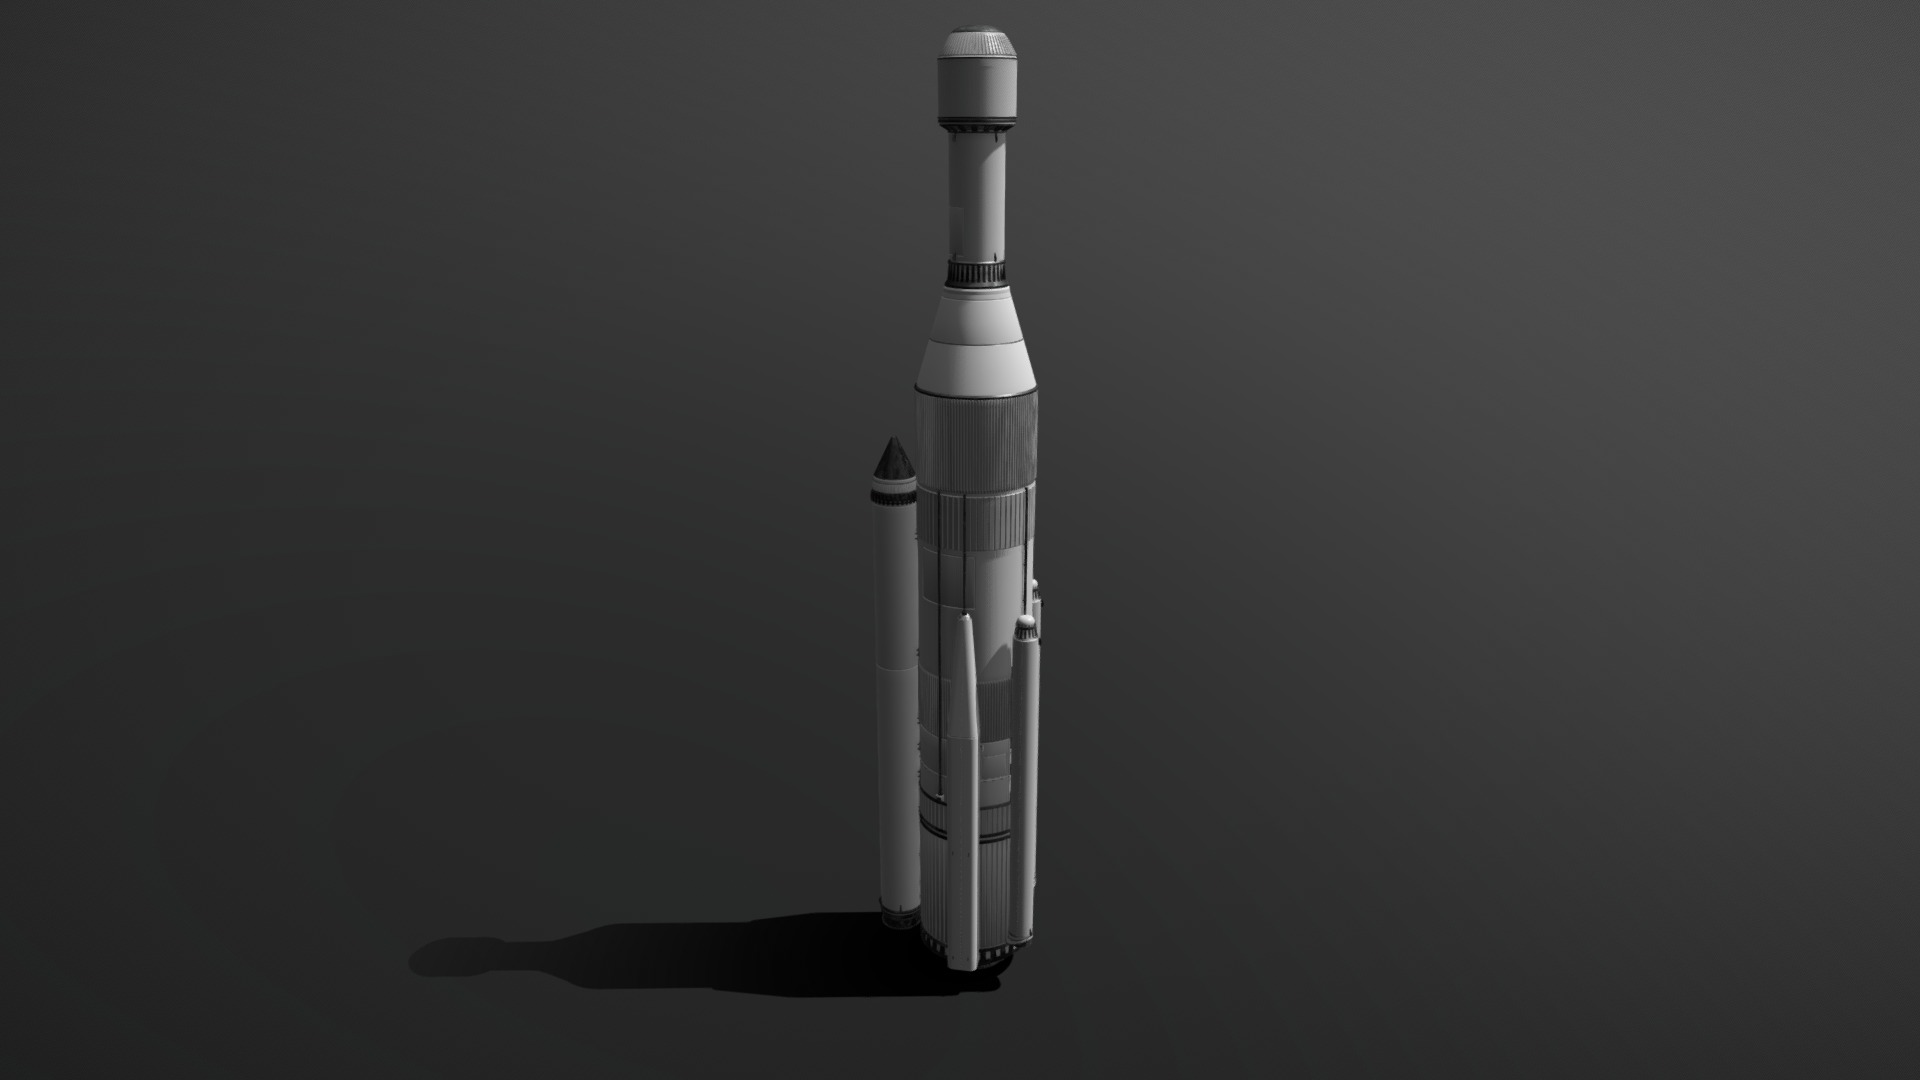 3D model Rocket basic - This is a 3D model of the Rocket basic. The 3D model is about a white and black cylindrical object.